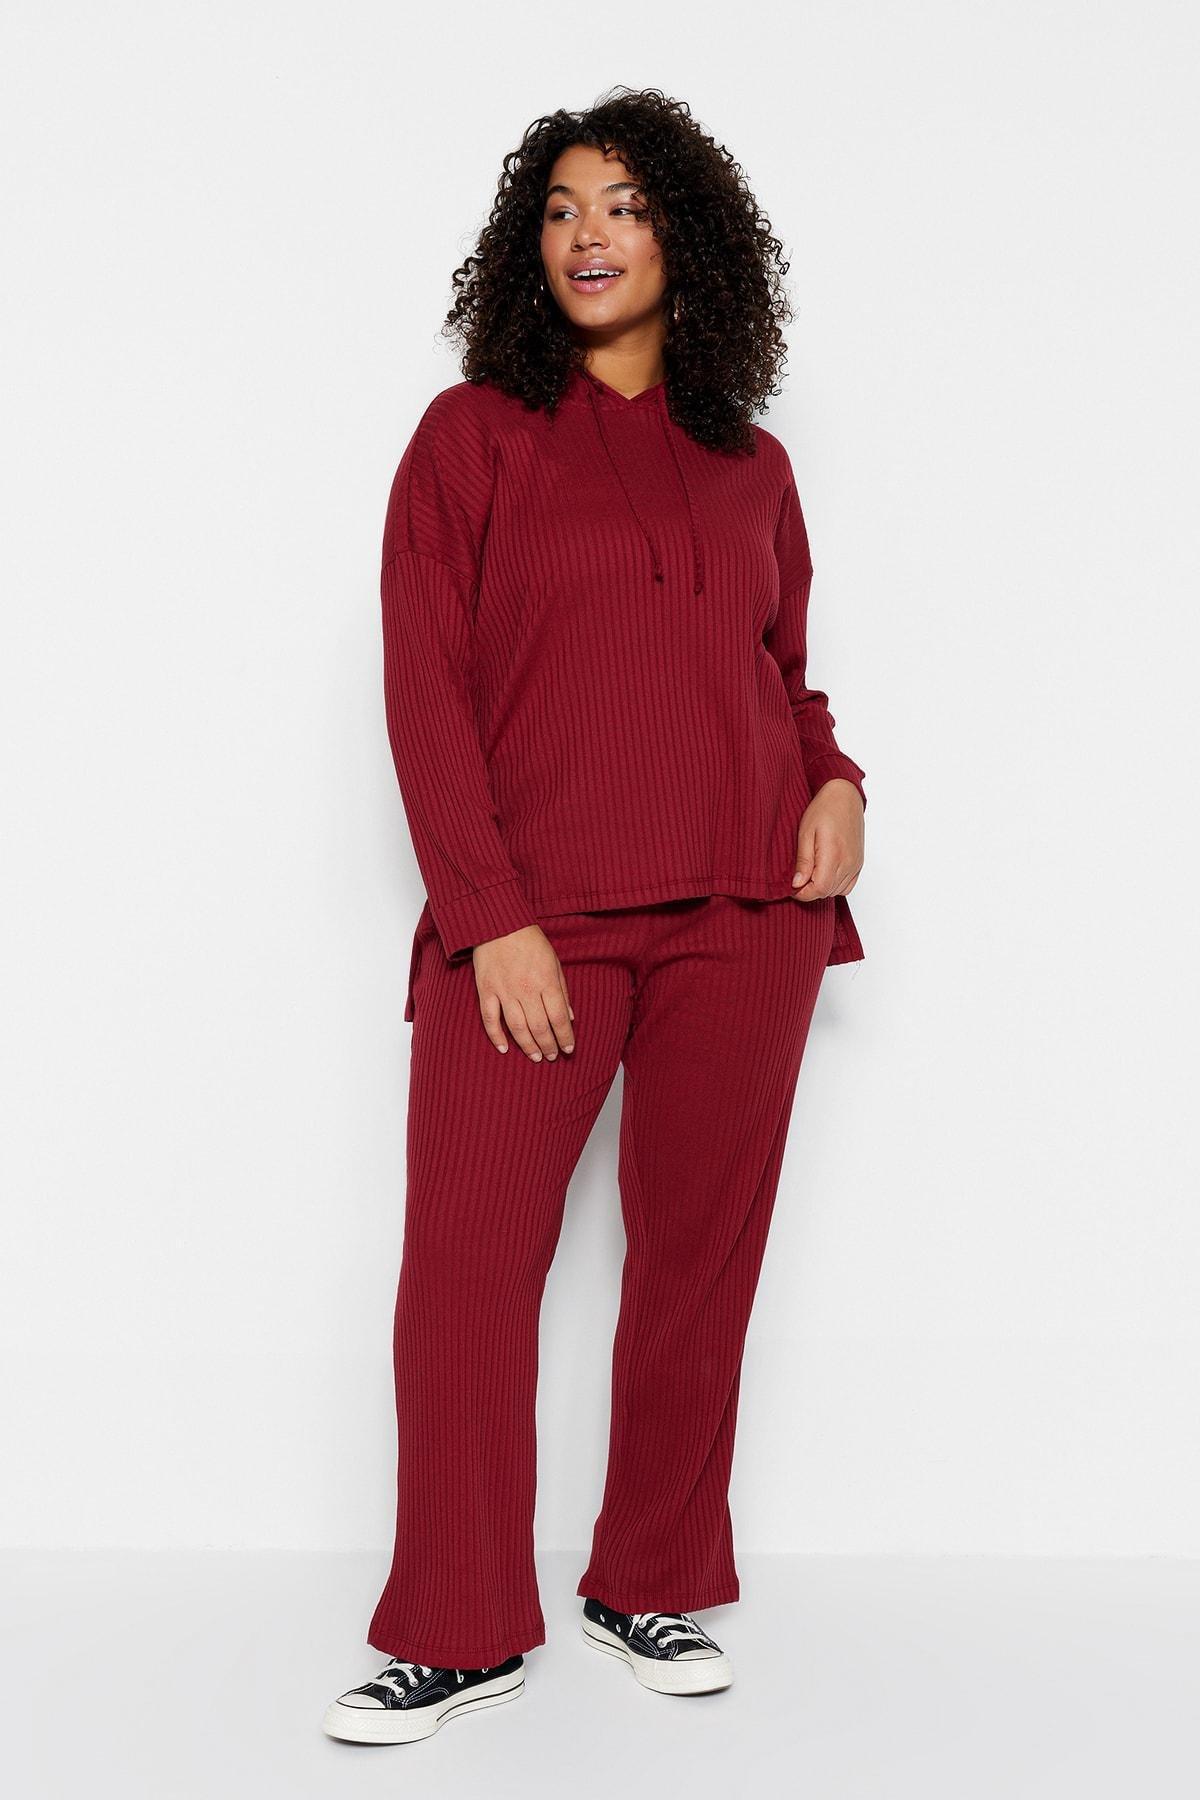 Trendyol - Burgundy Knitted Plus Size Co-Ord Sets